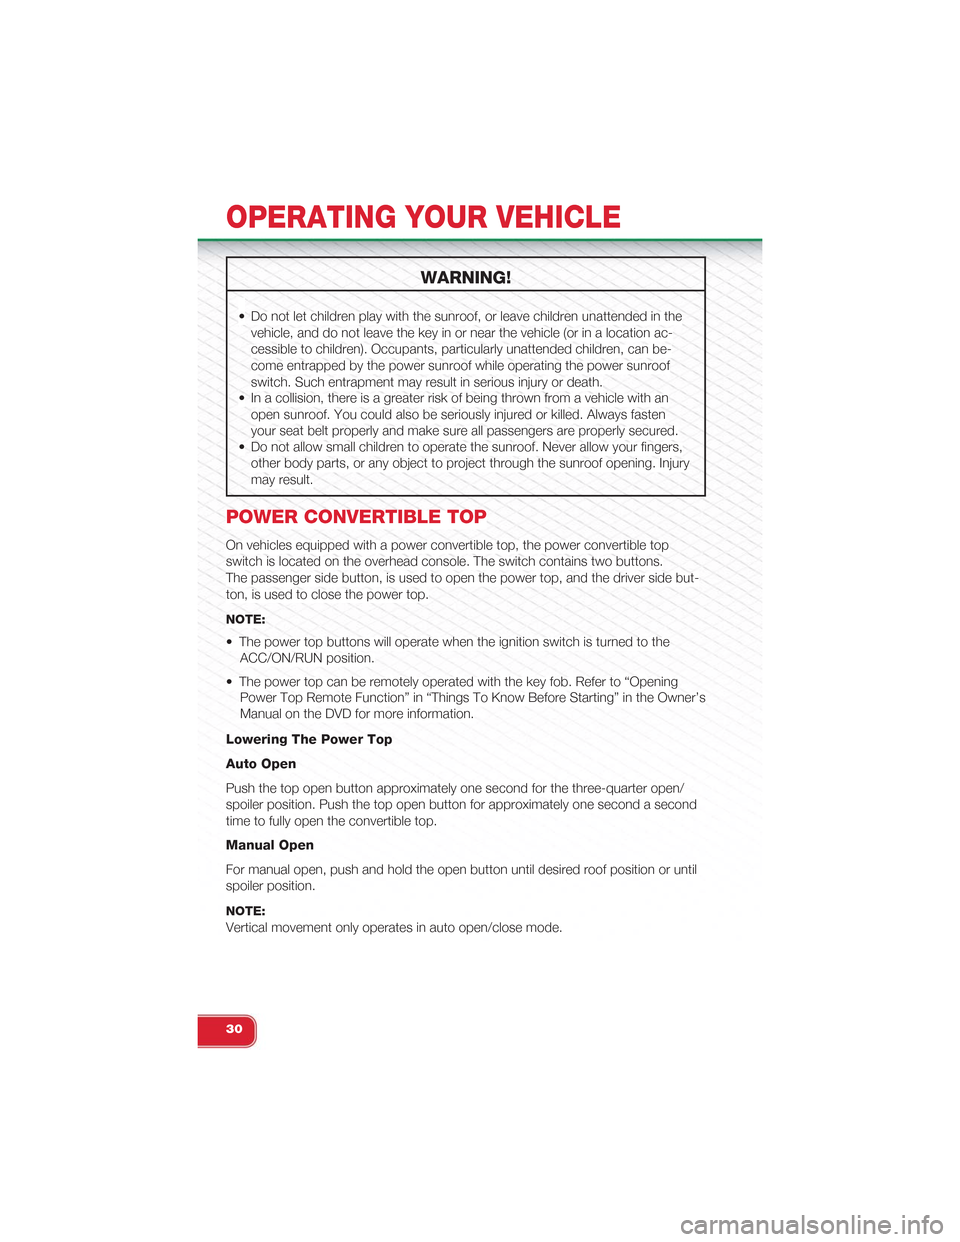 FIAT 500 ABARTH 2014 2.G User Guide WARNING!
• Do not let children play with the sunroof, or leave children unattended in the
vehicle, and do not leave the key in or near the vehicle (or in a location ac-
cessible to children). Occupa